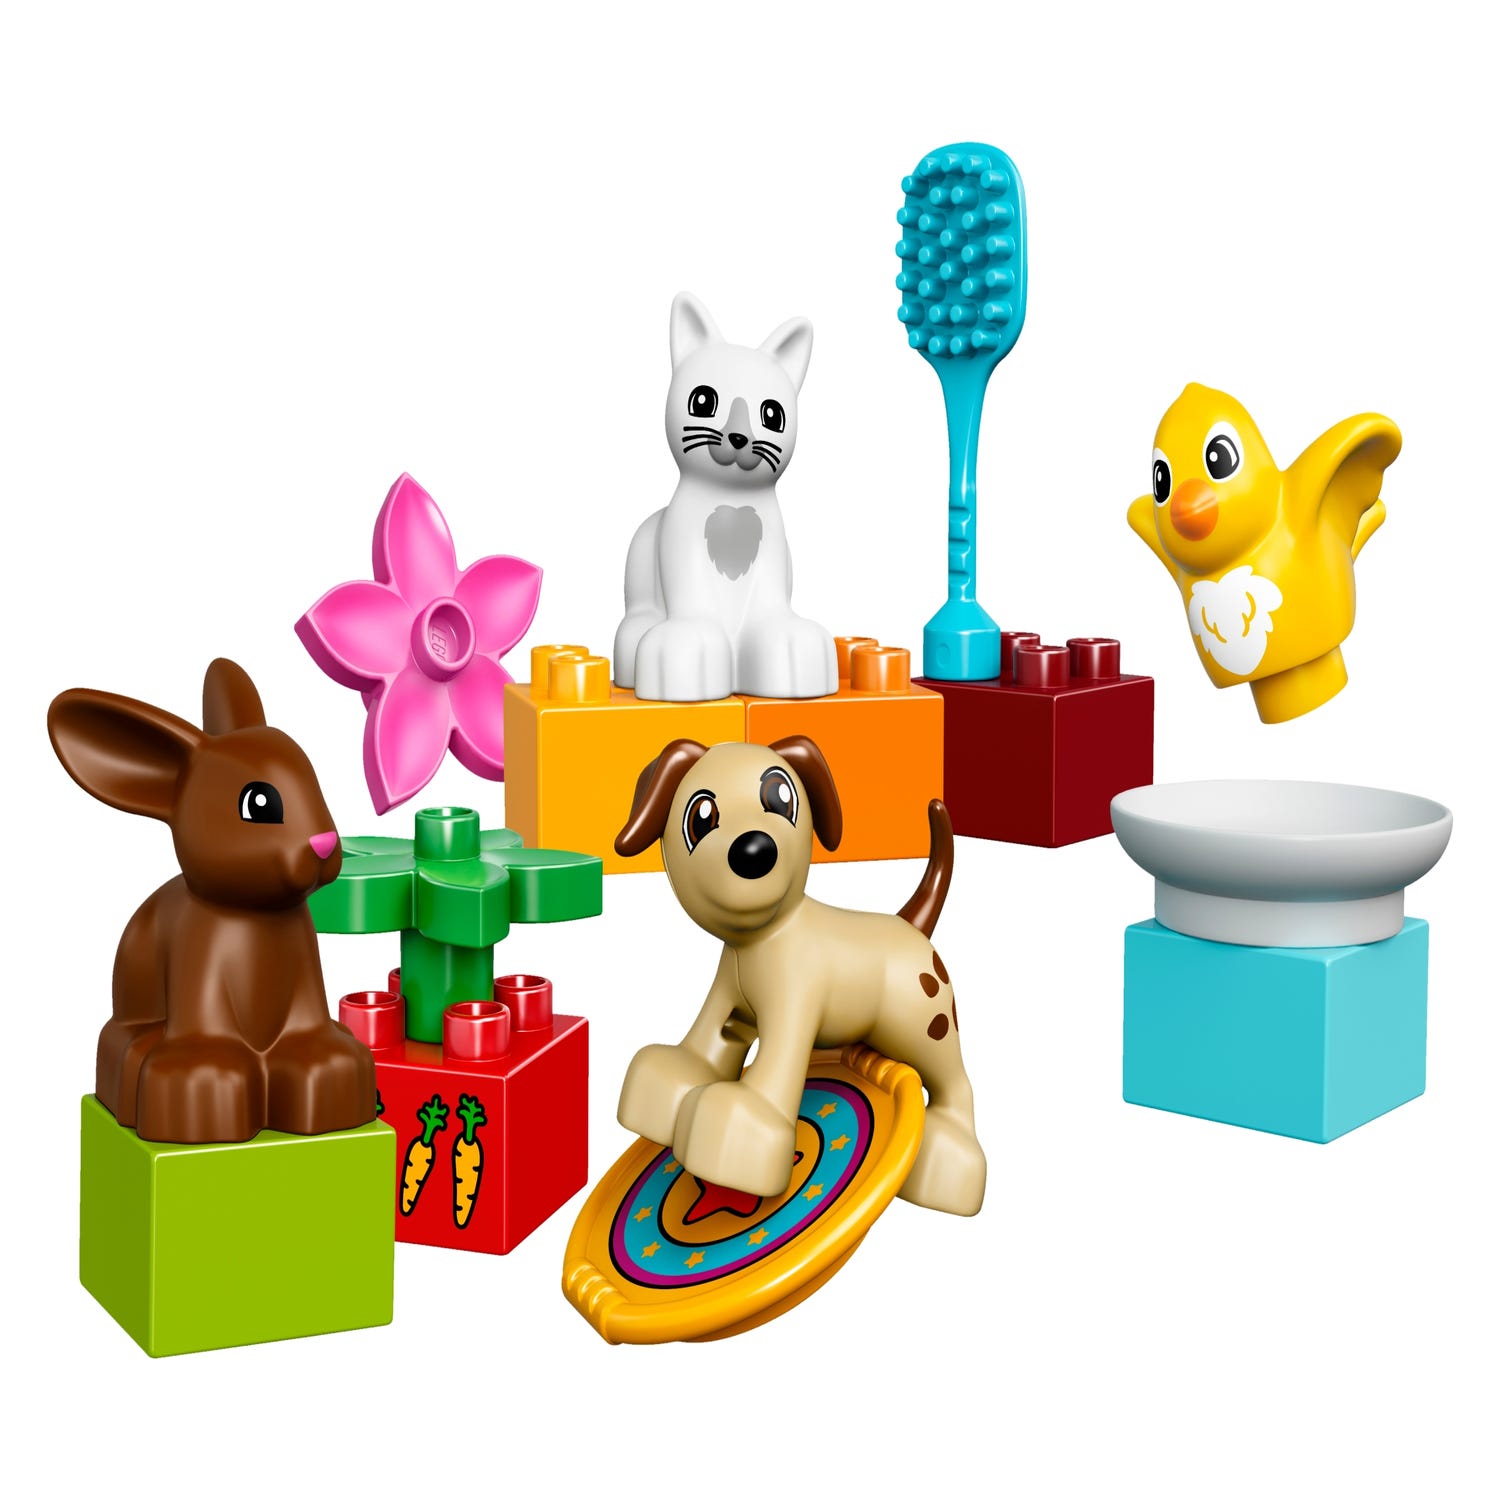 Pets 10838 DUPLO® | online at the Official LEGO® Shop US